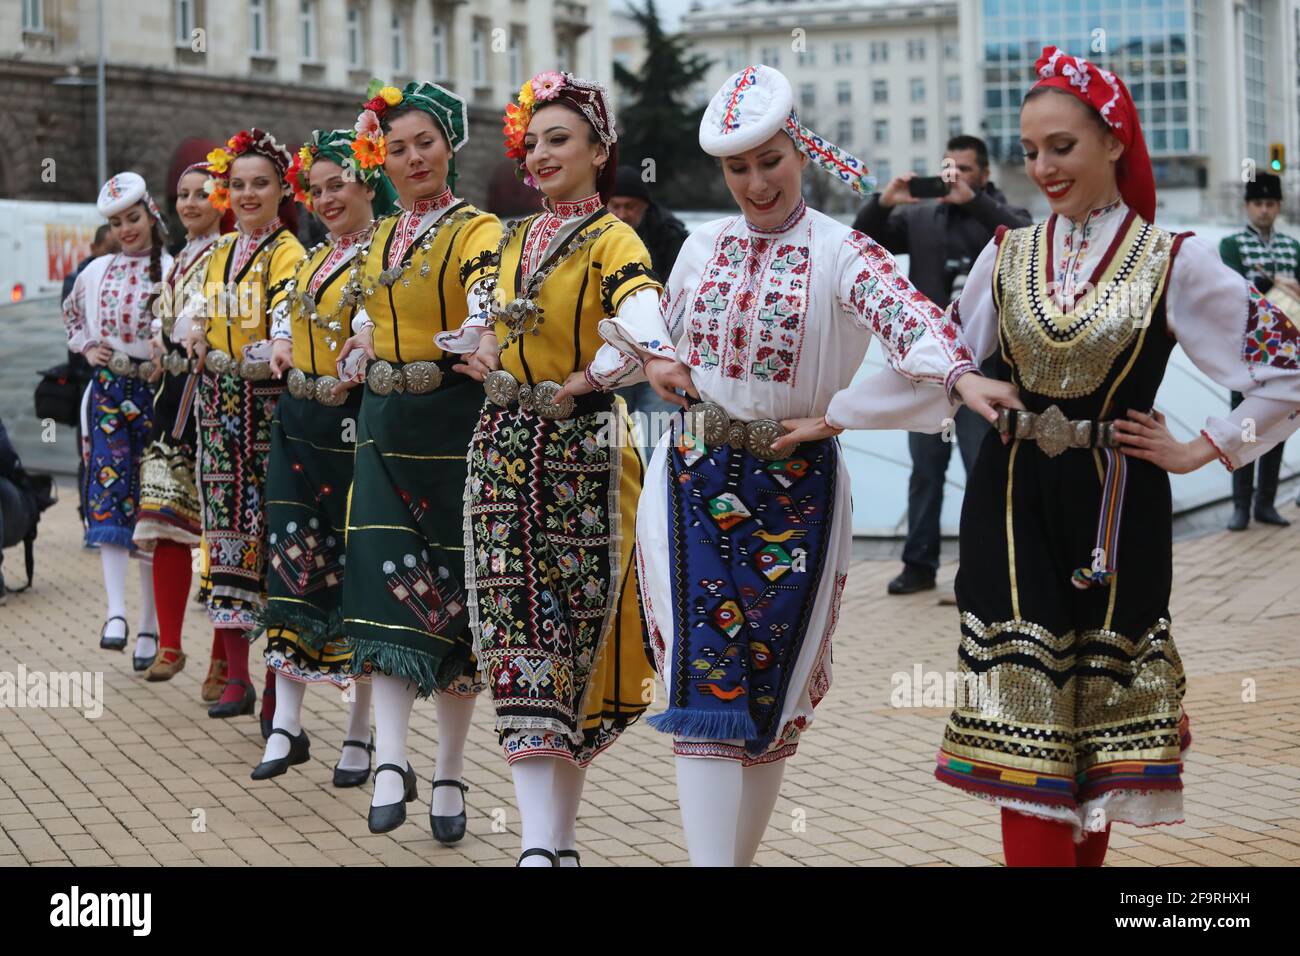 People in traditional folk costumes perform the Bulgarian folk dance 'Horo' in the center of Sofia, Bulgaria Stock Photo